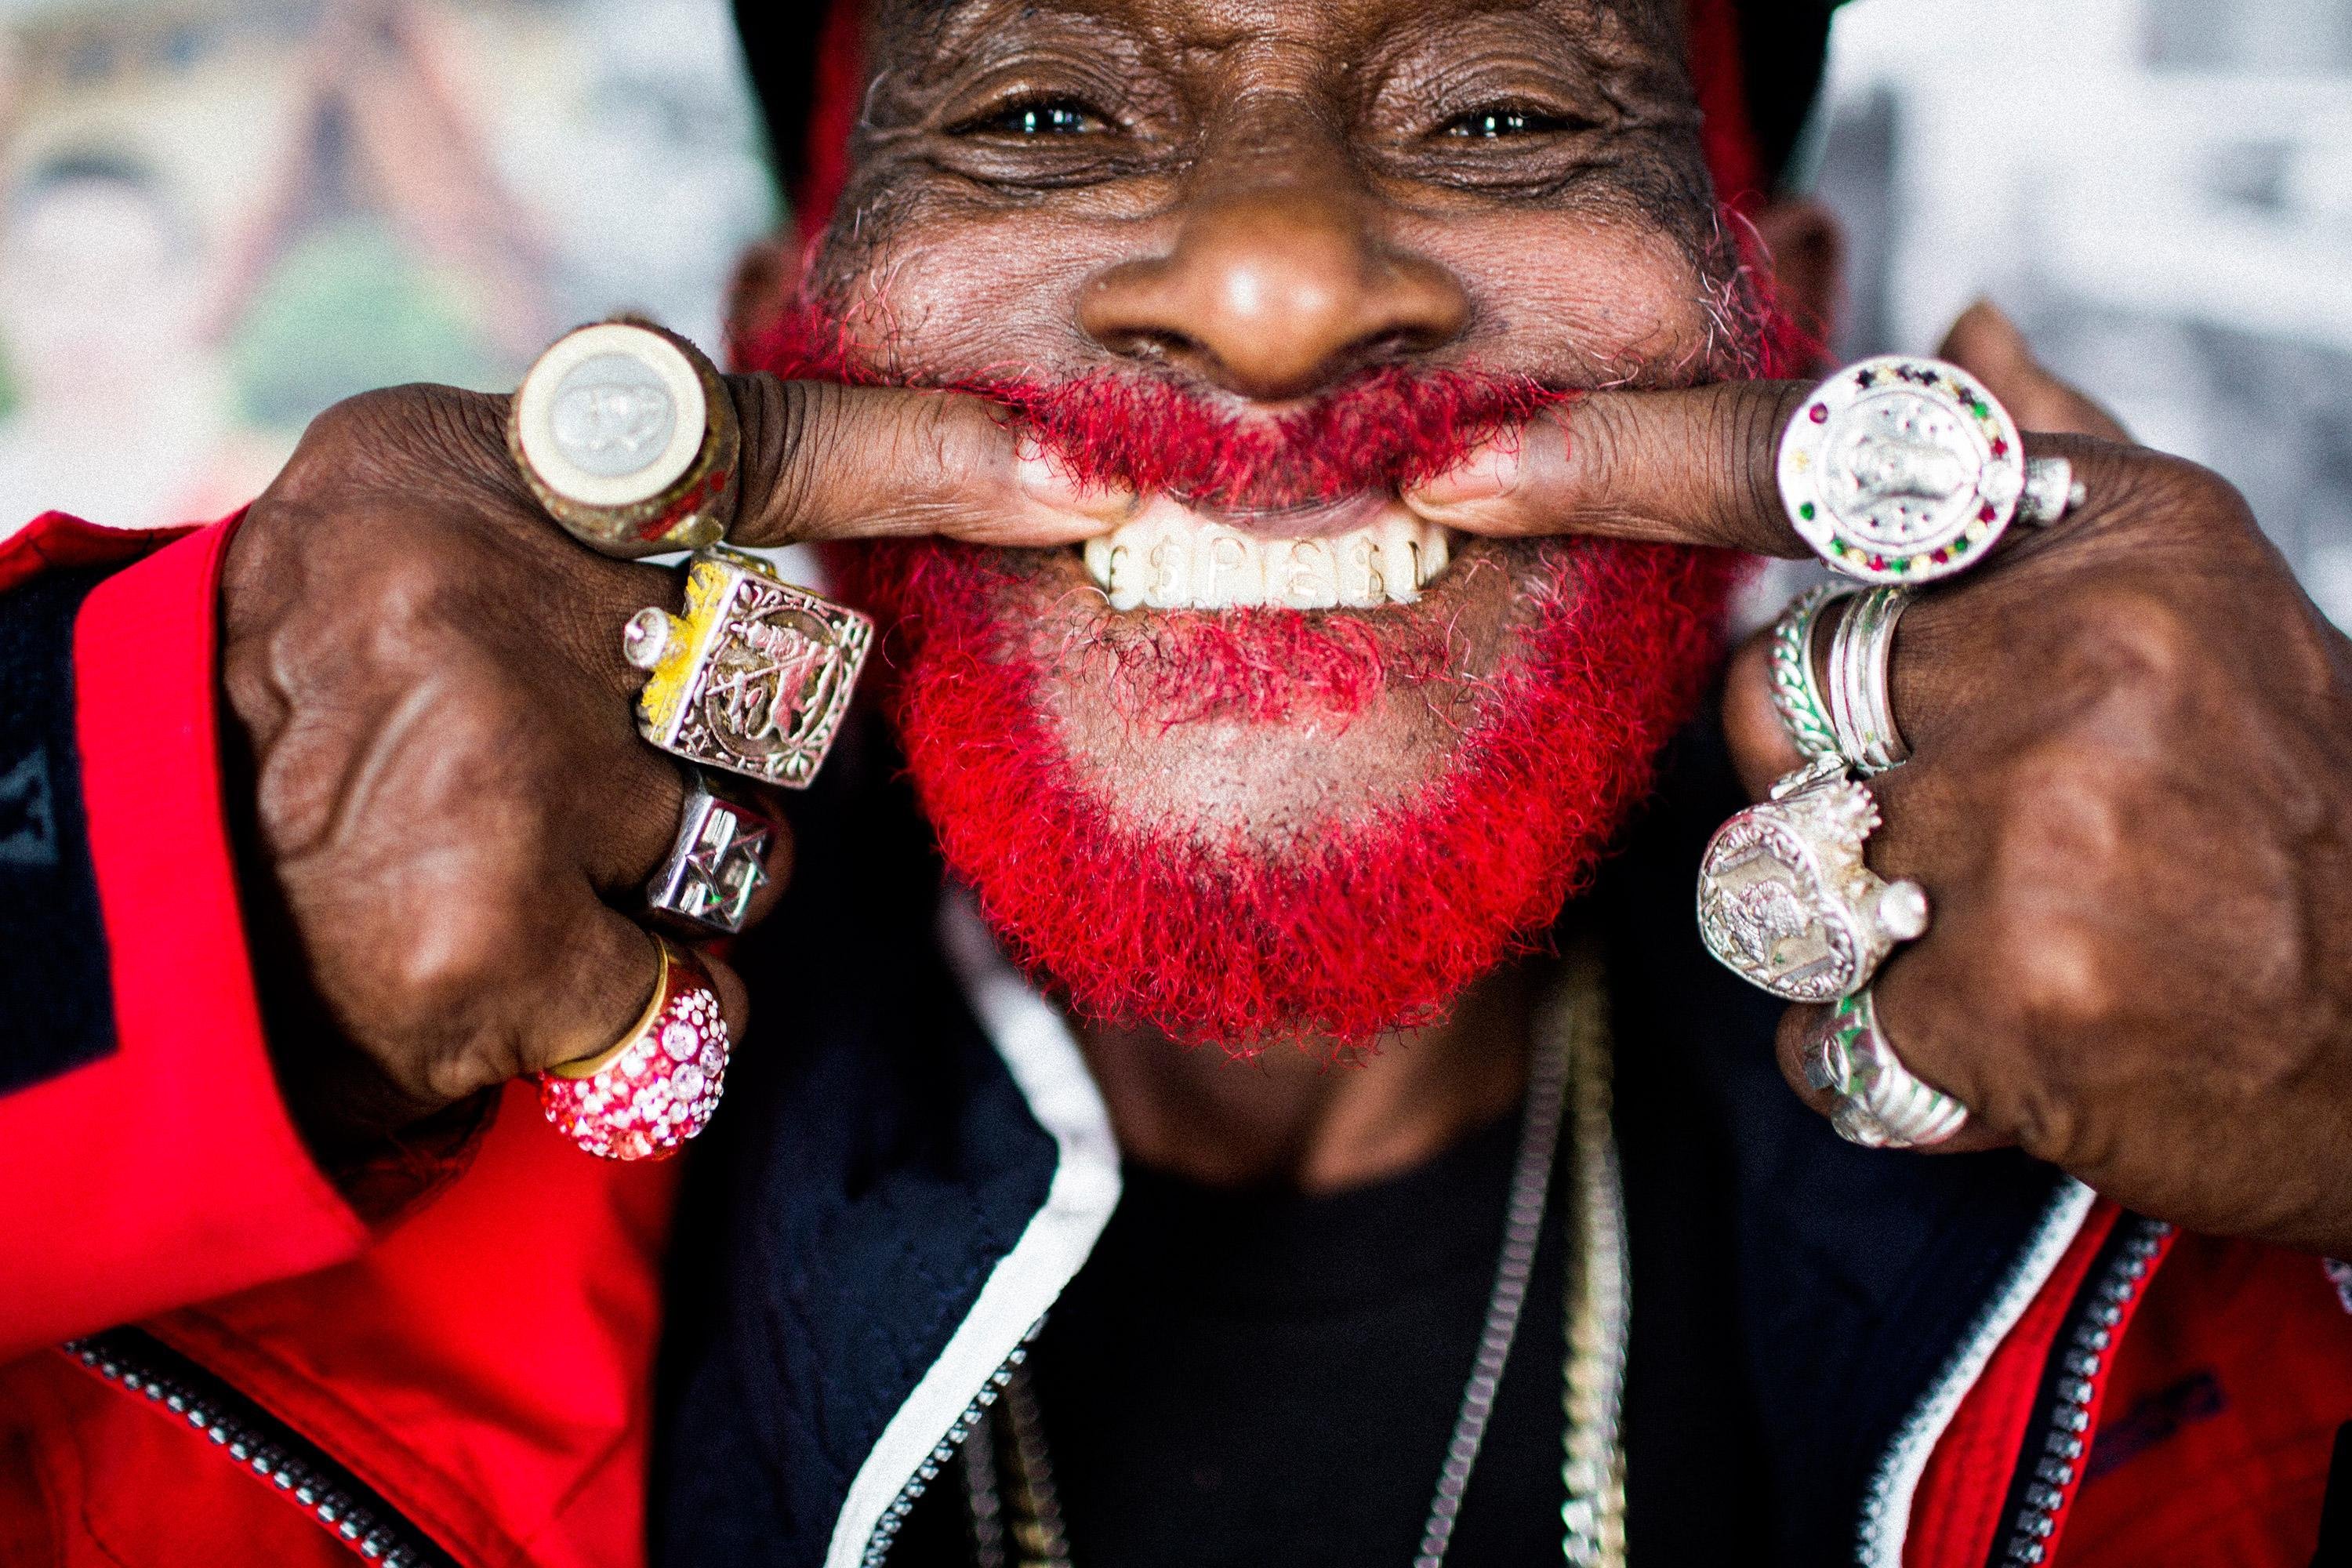 Sexy Hd Video China Girls Westindies Boy - The Ultimate Lee 'Scratch' Perry Guide | Red Bull Music Academy Daily